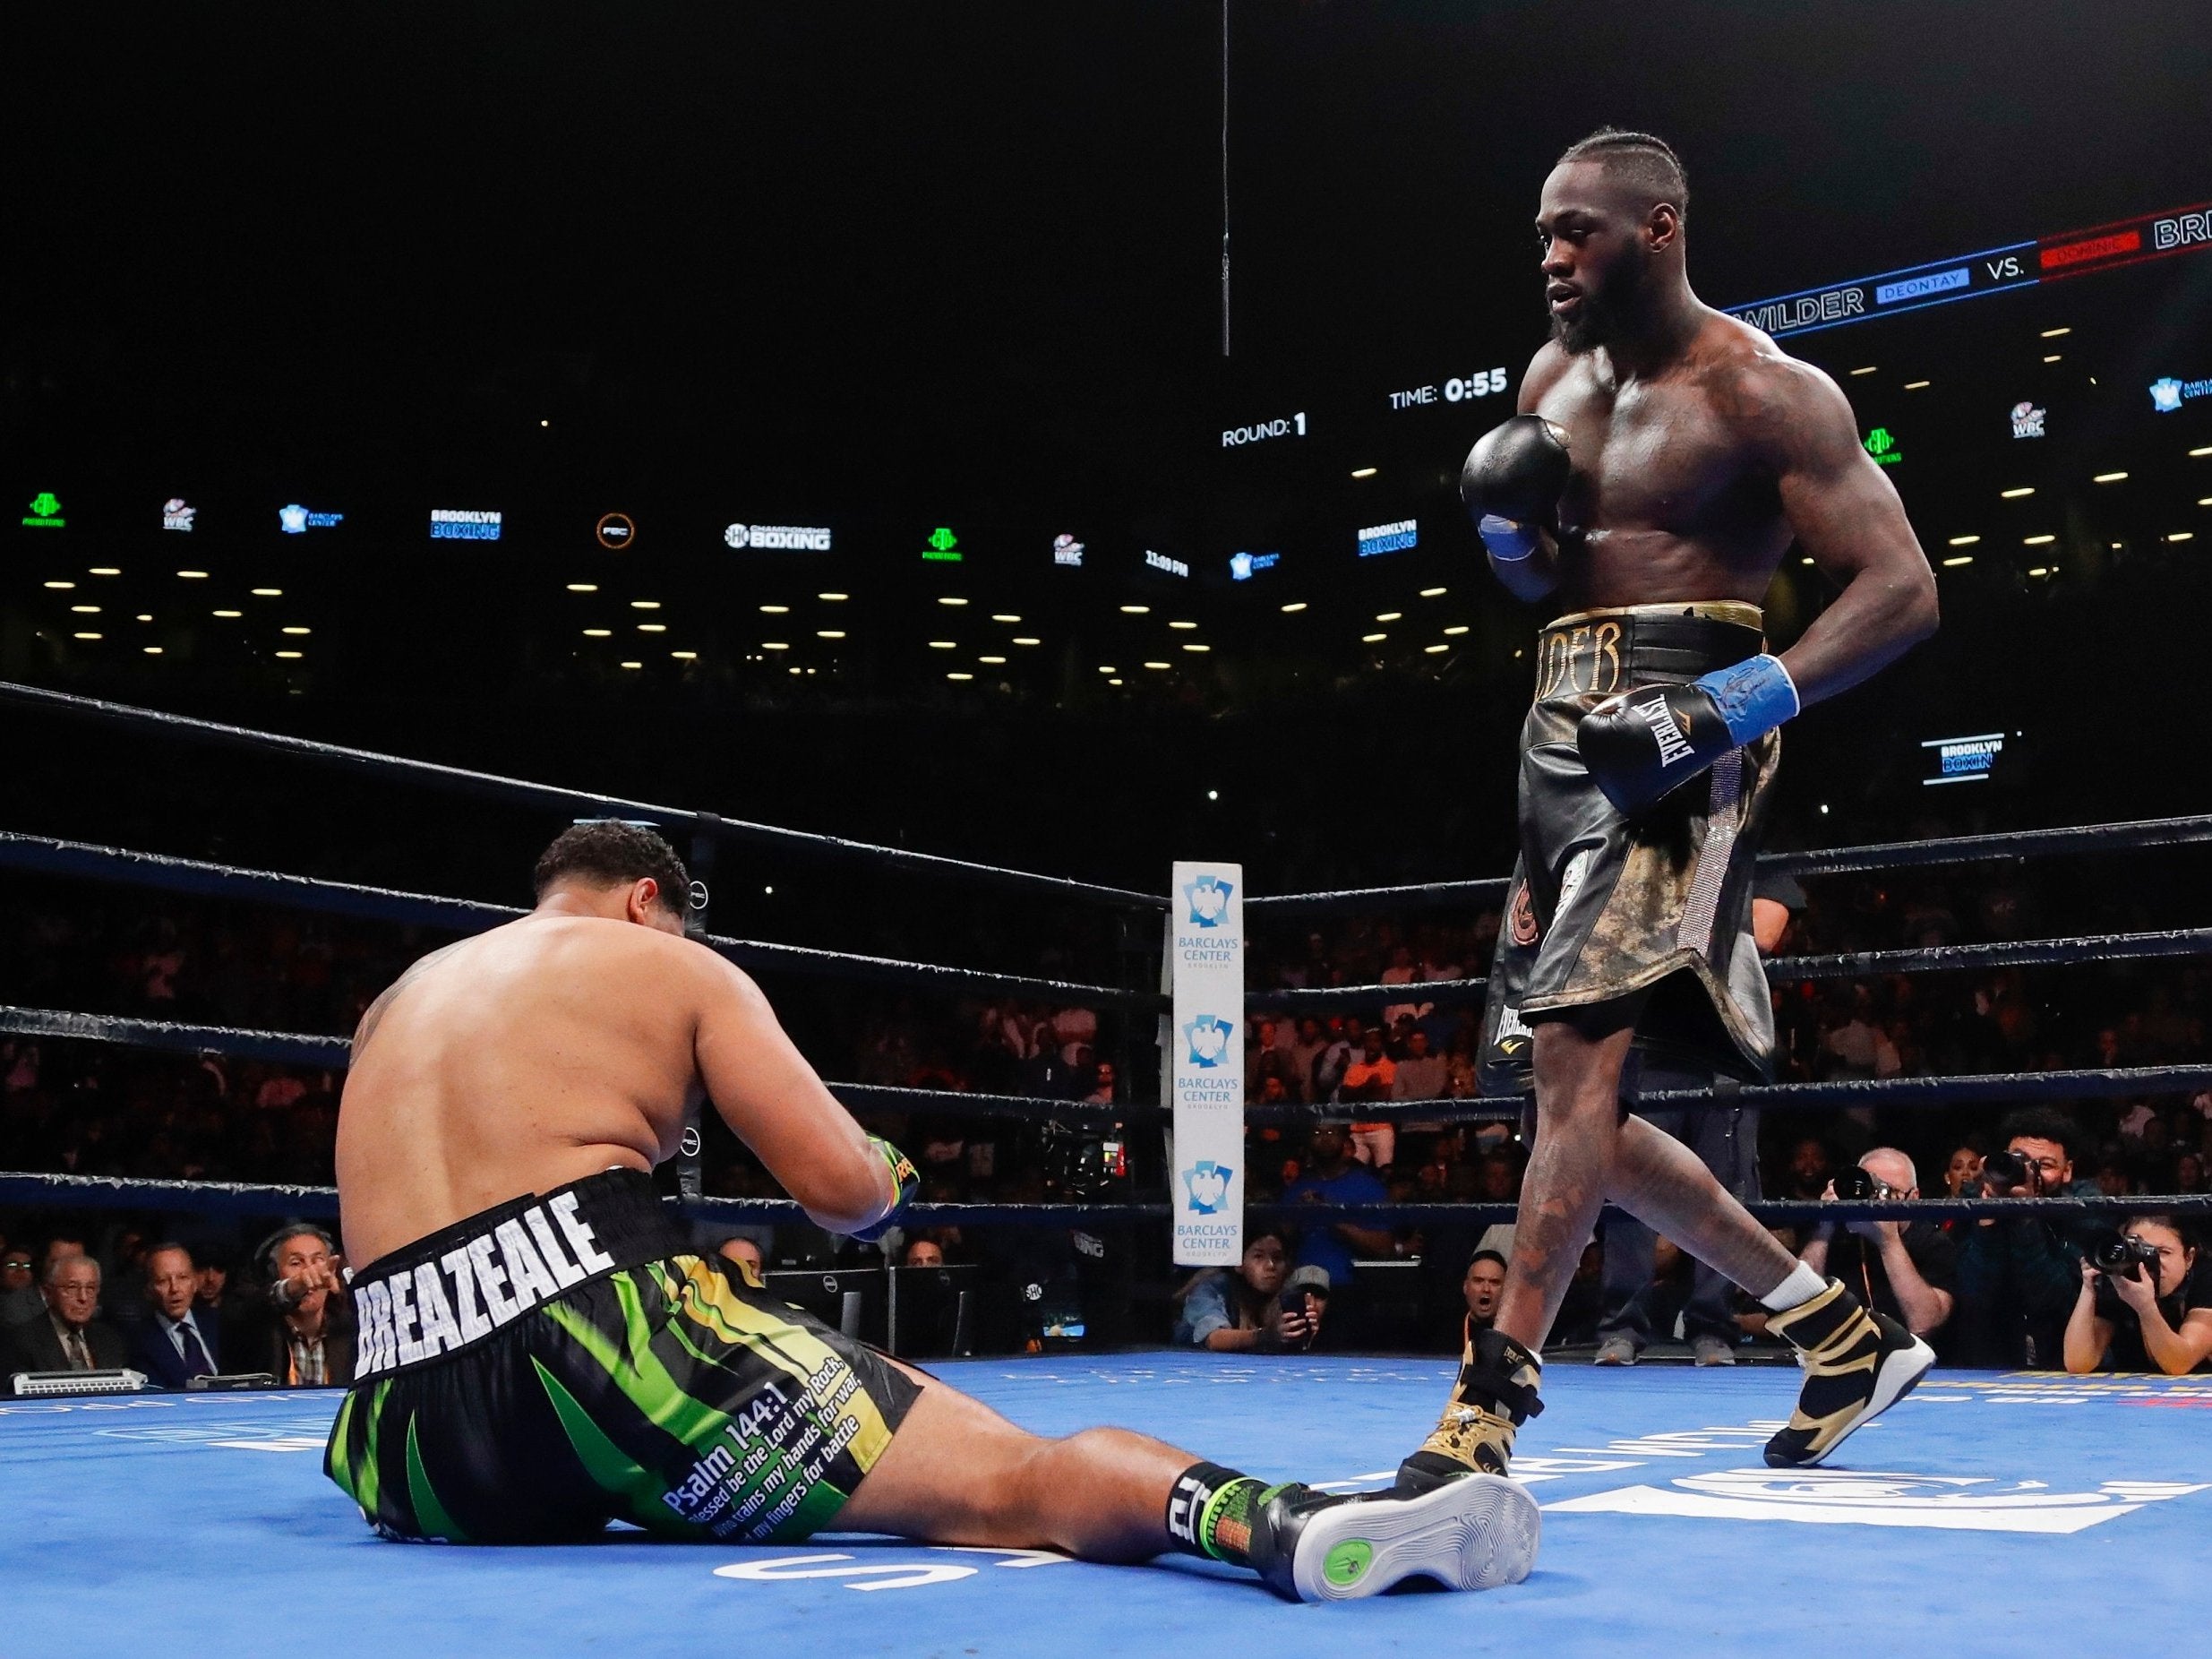 Deontay Wilder knocks out Dominic Breazeale in the first round of their heavyweight title contest